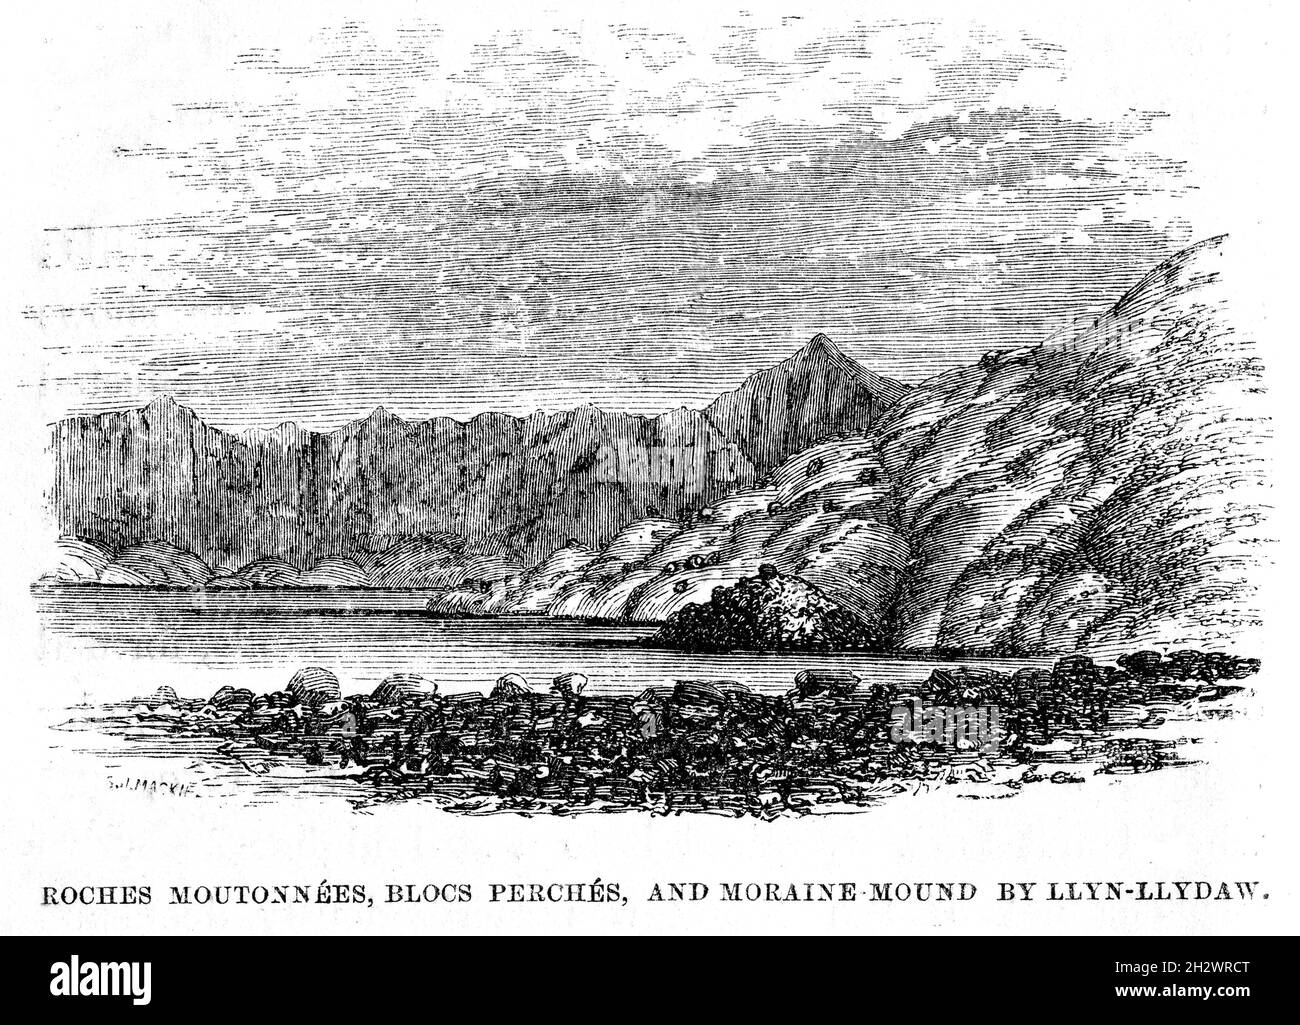 An 1859 wood cut illustration entitled “Roche Moutonnées, Bloc Perchés, and Moraine Mound by Llyn-Llydaw”. Llyn Llydaw is a natural lake on the flanks of Mount Snowdon, Wales. Stock Photo